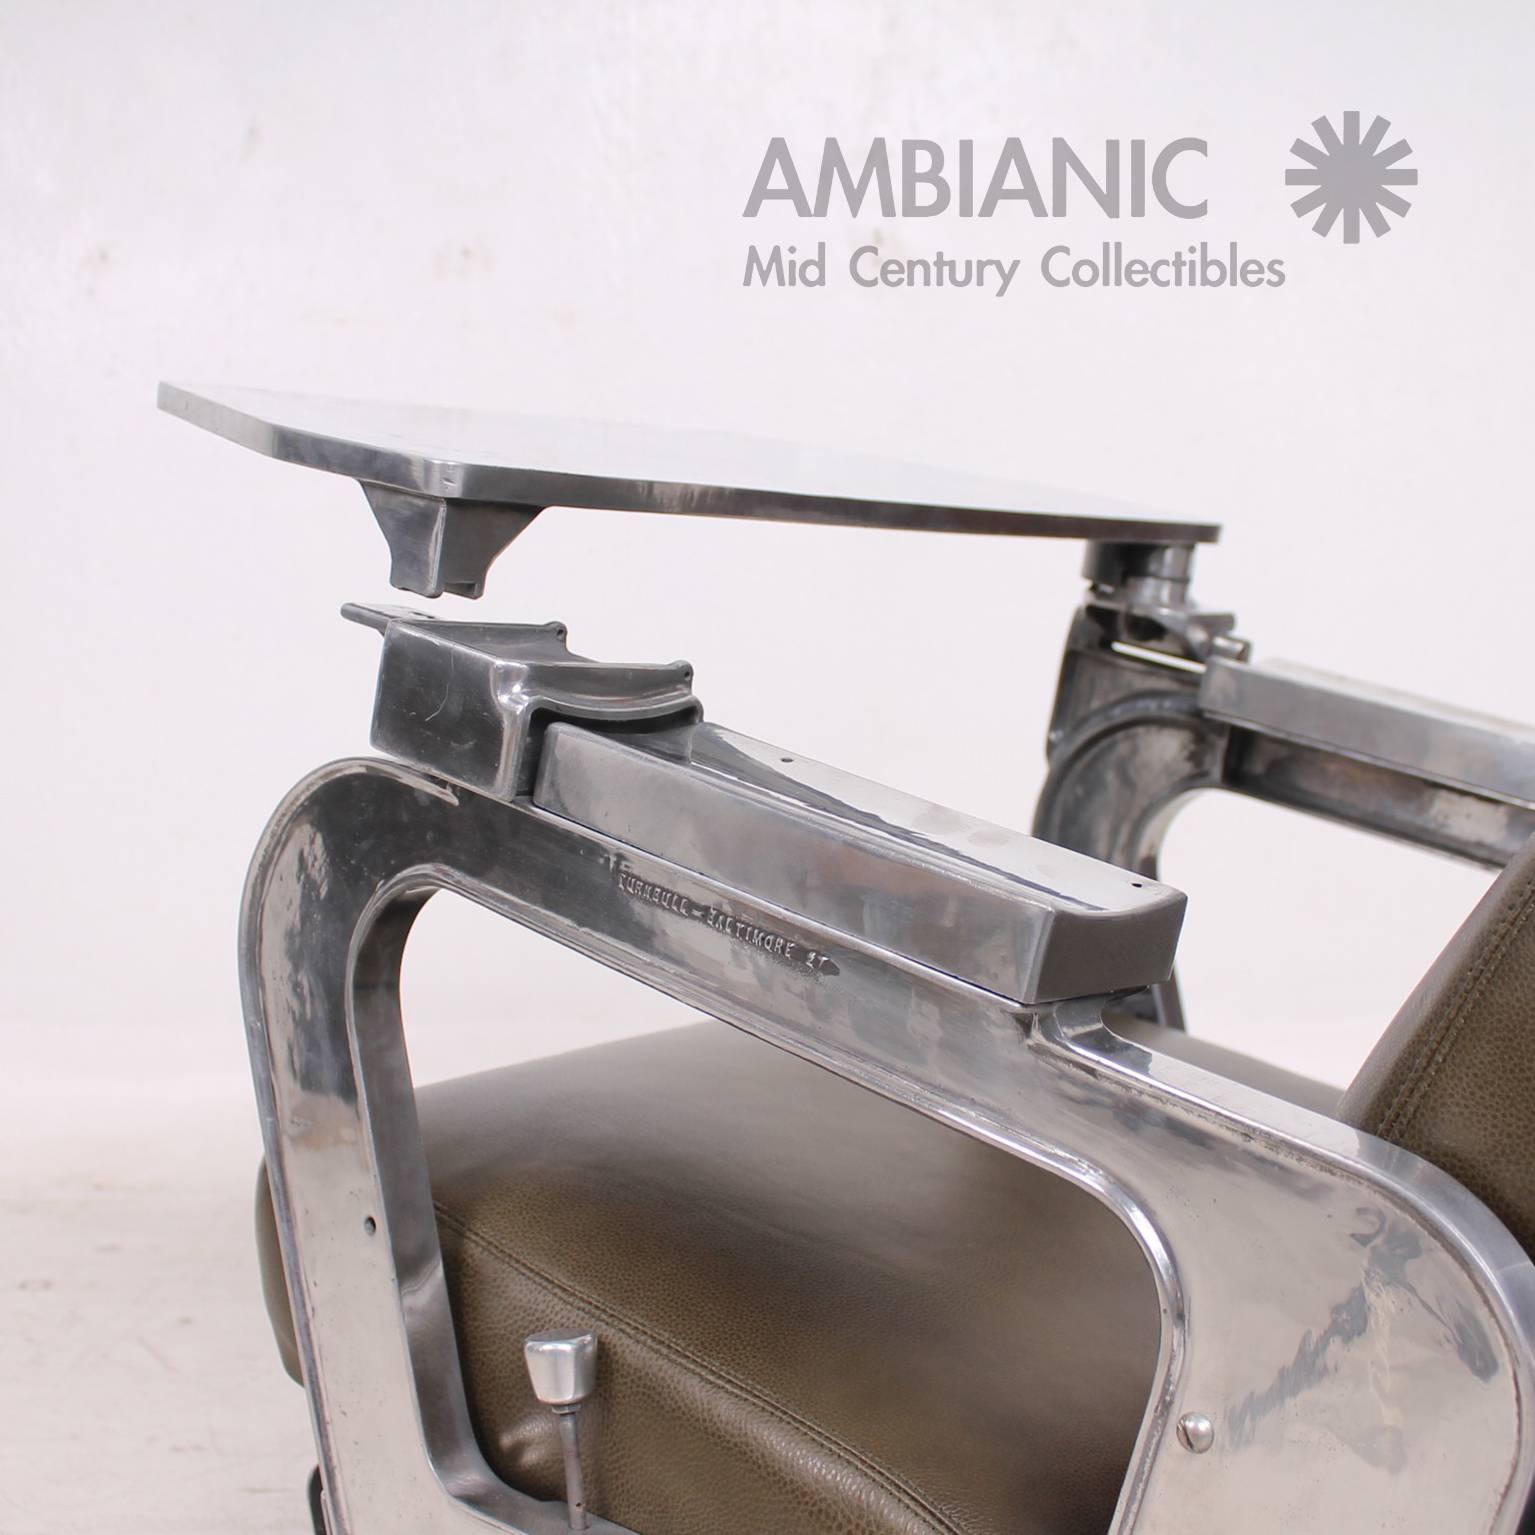 For your consideration a Mid-Century period airplane chair made of polished aluminum and new olive green leather. 

The chair has an unusual Industrial look mix with air of the air deco period. 
The Italian leather is soft and it has a beautiful